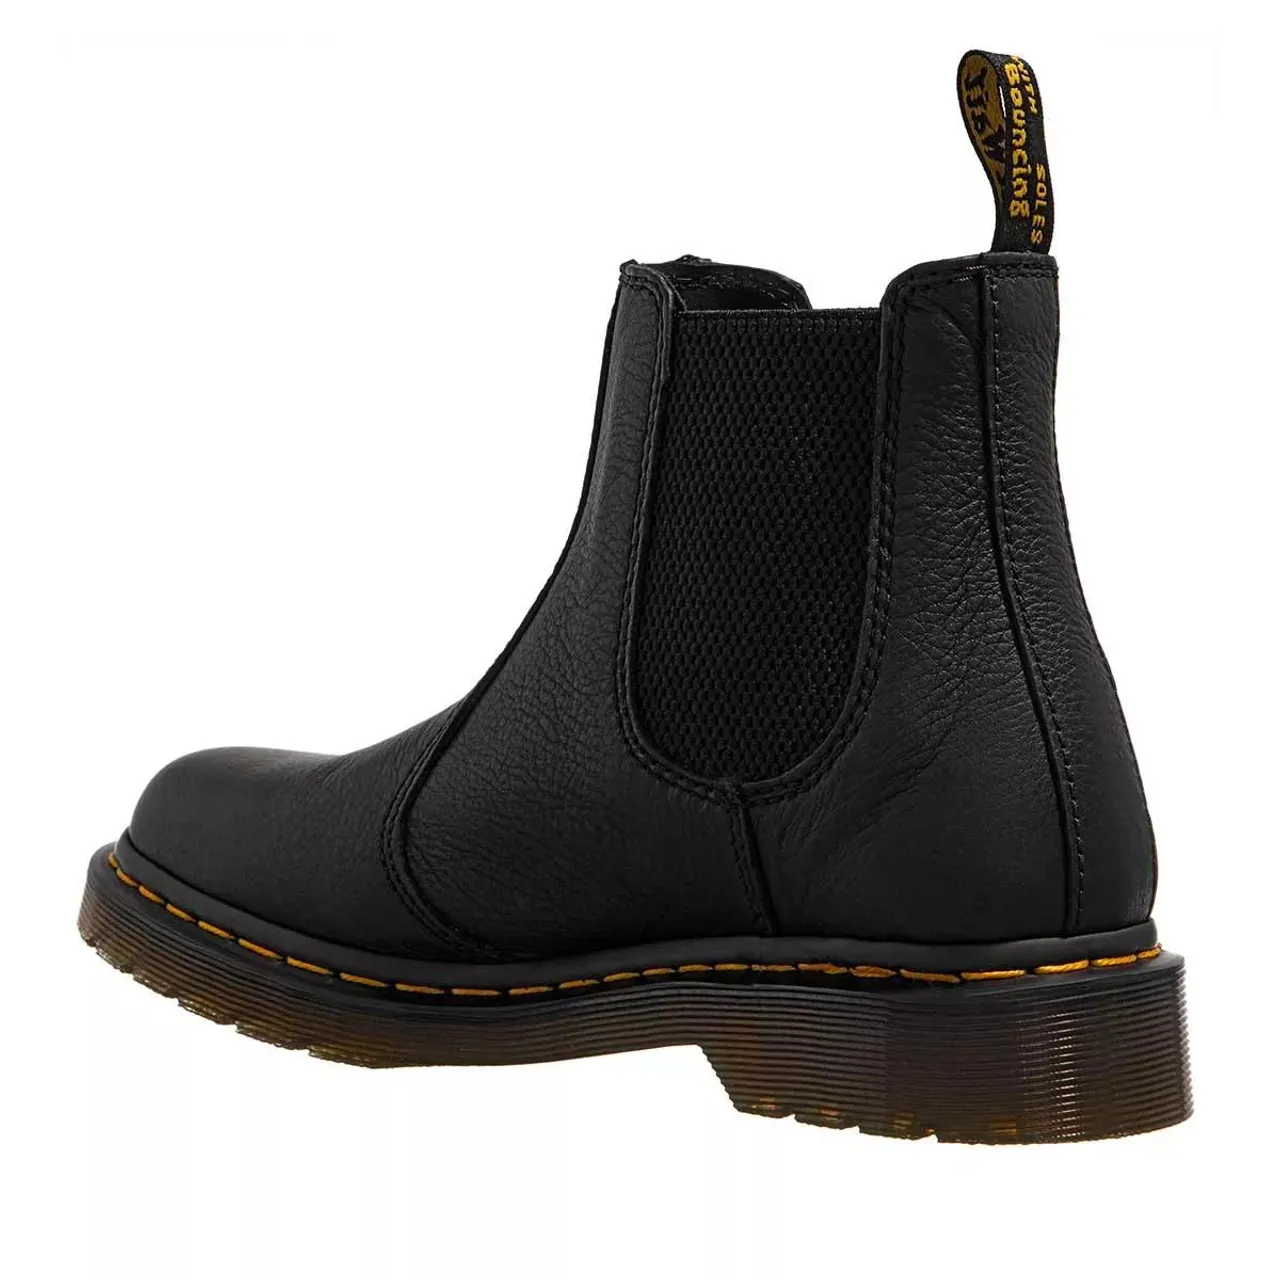 Dr. Martens Boots & Ankle Boots - 2976 Chelsea Boot - black - Boots & Ankle Boots for ladies